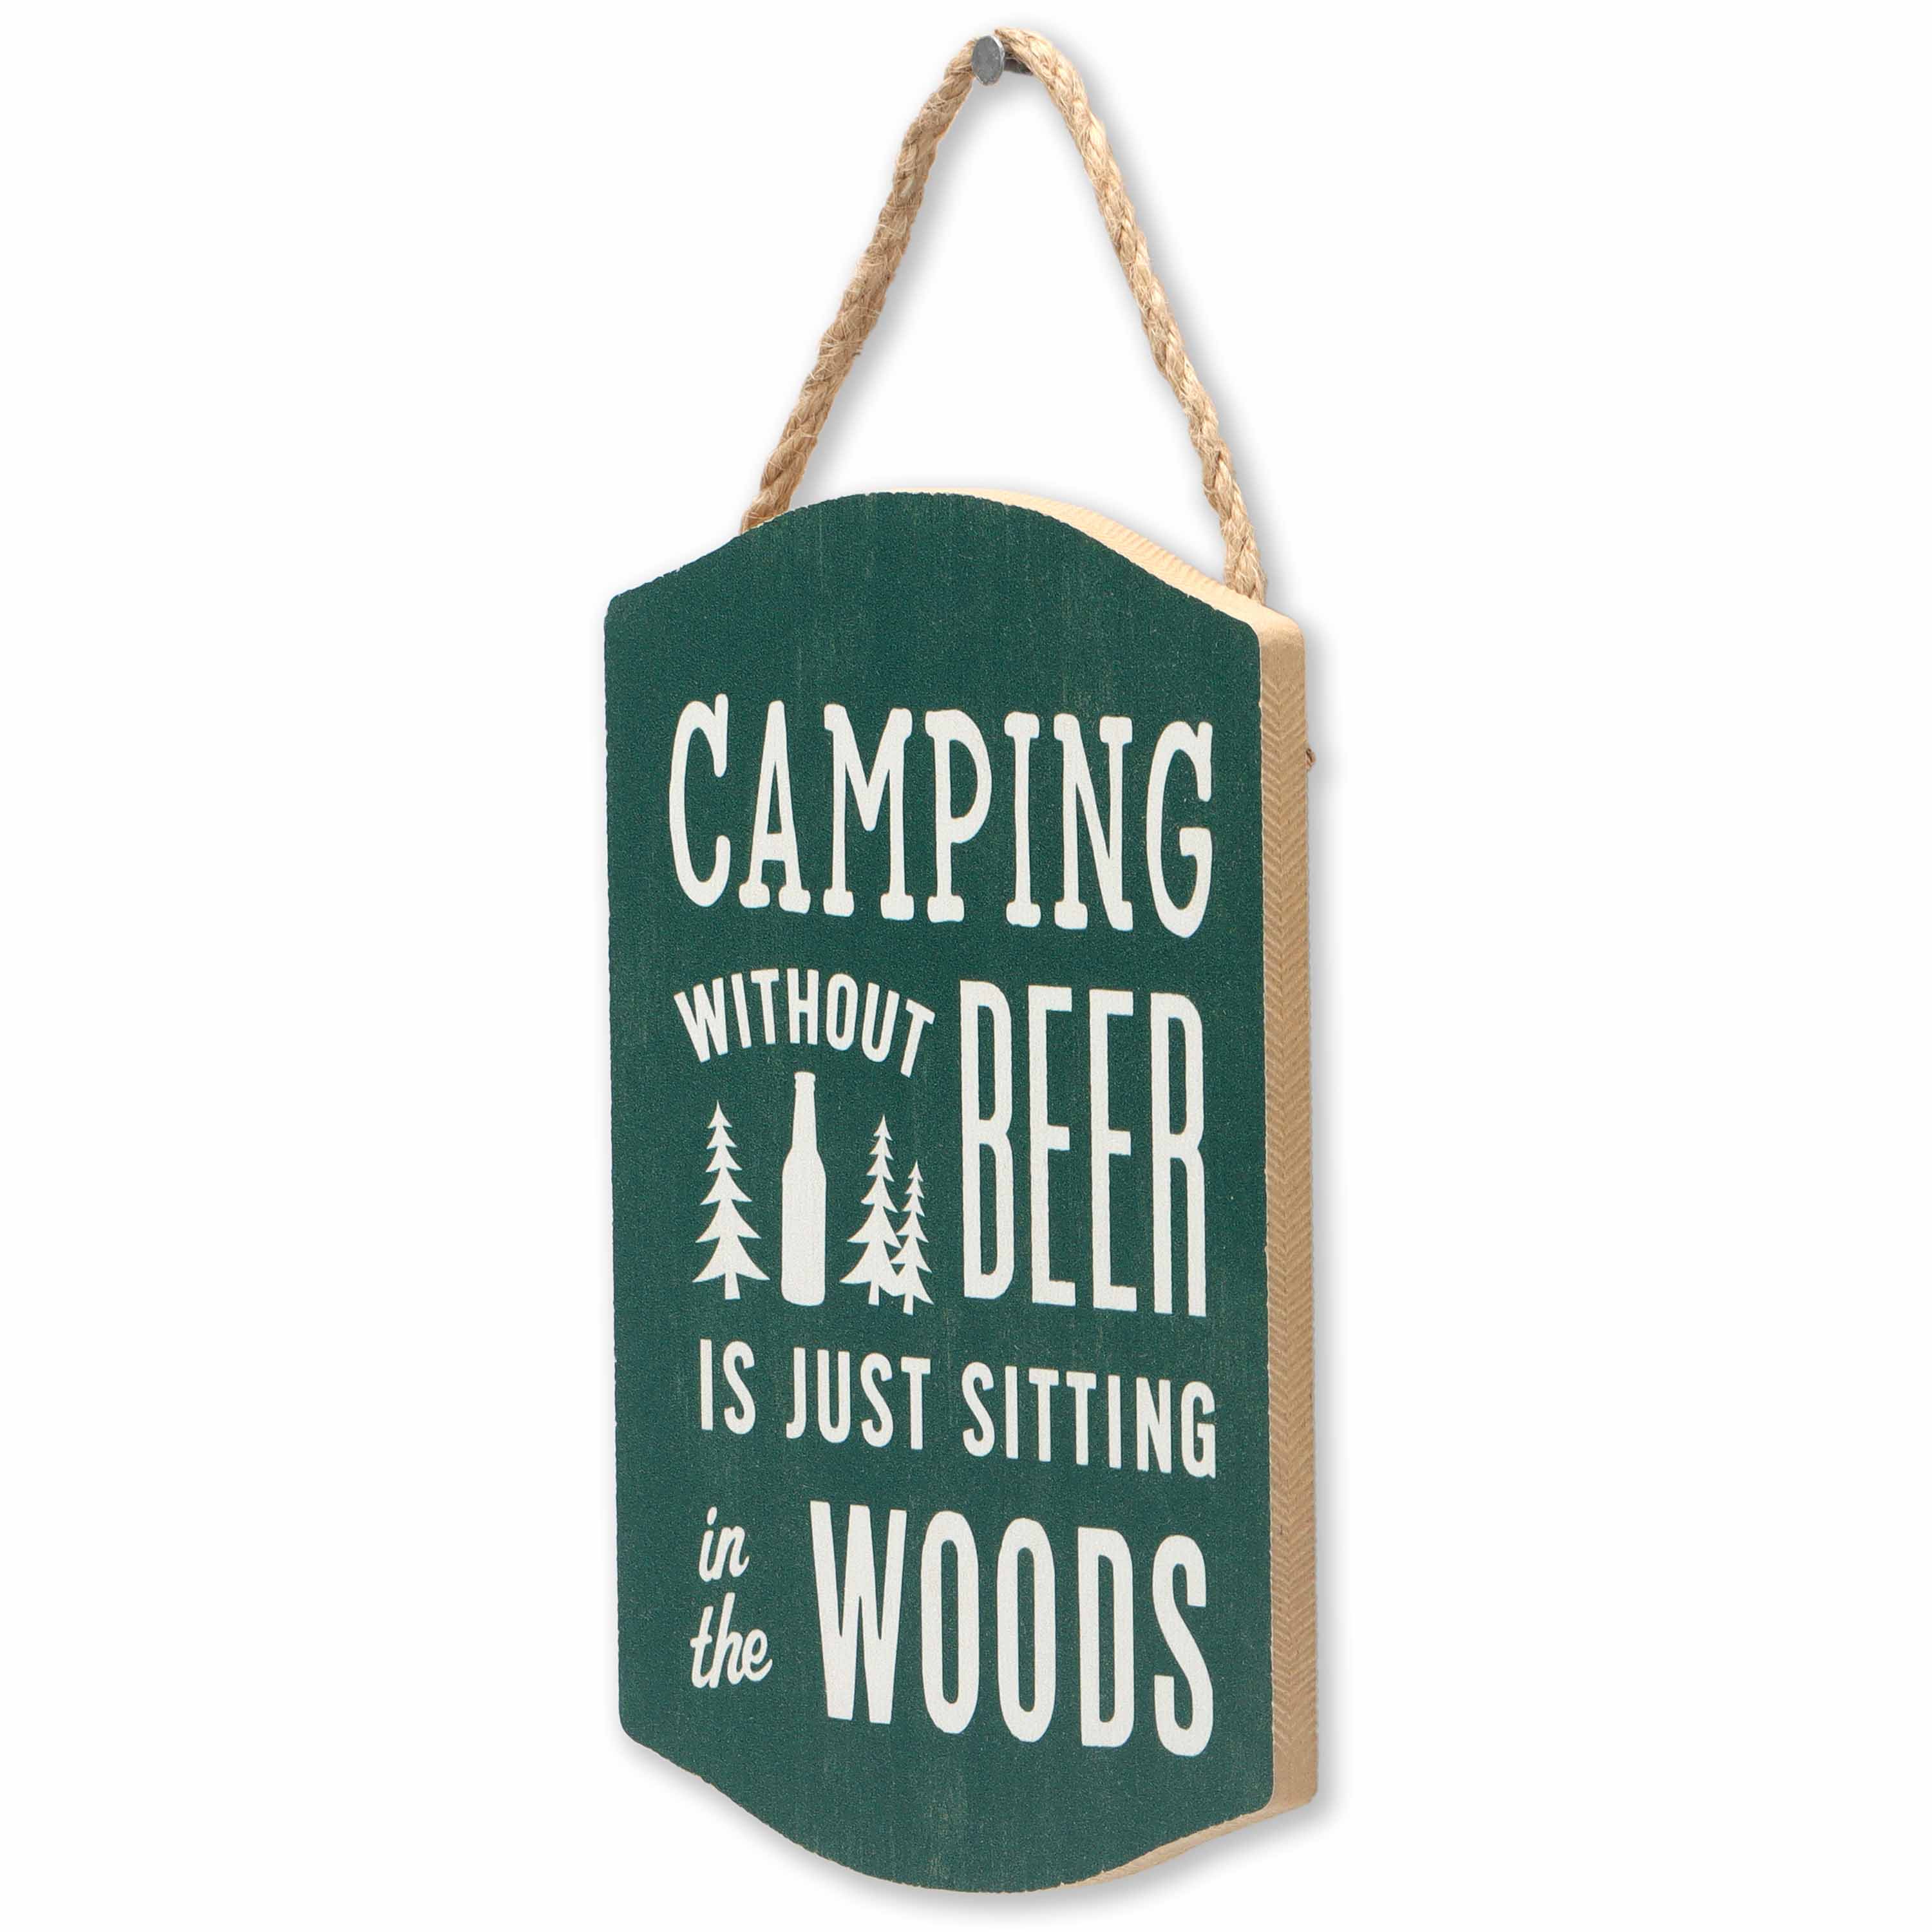 Open Road's Camping Without Beer Sign